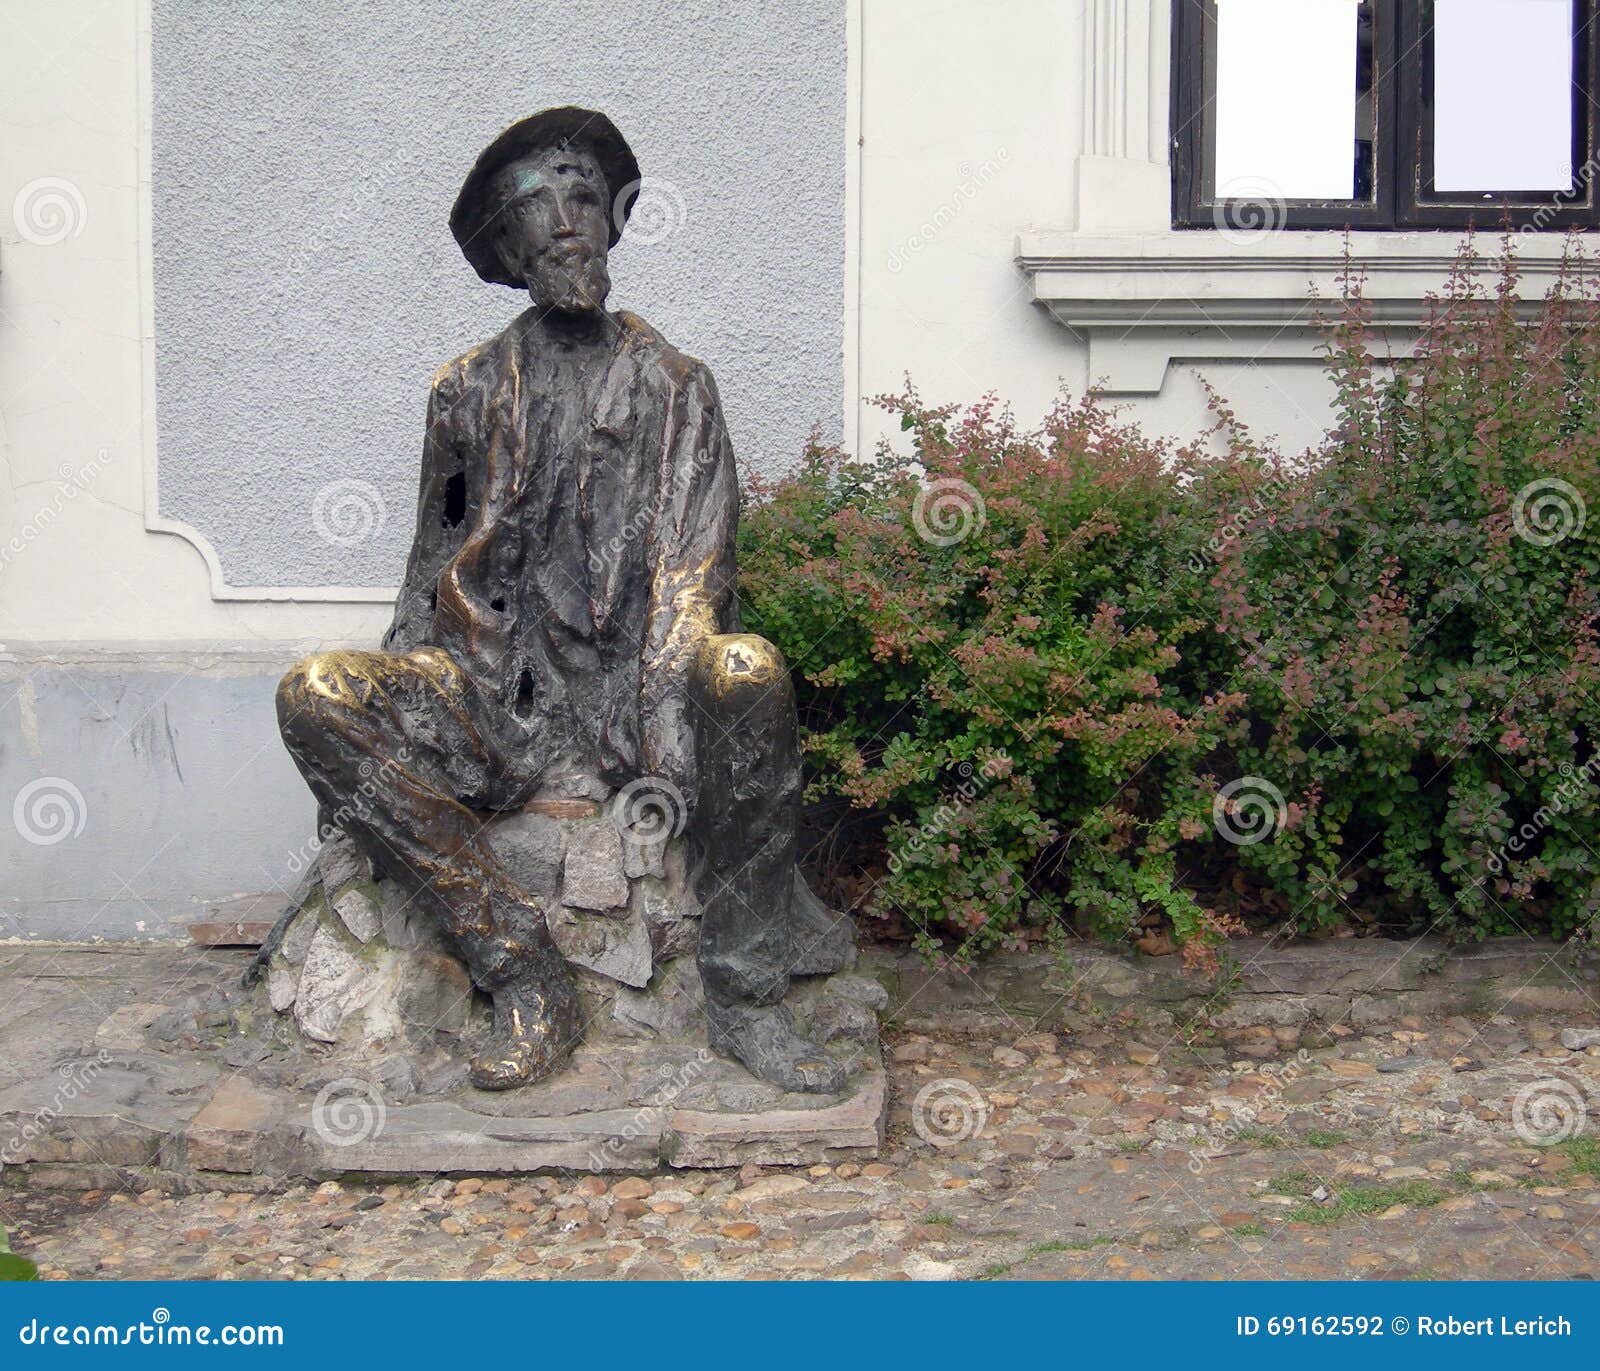 statue dura jaksic famous serbian poet, painter and writer in b